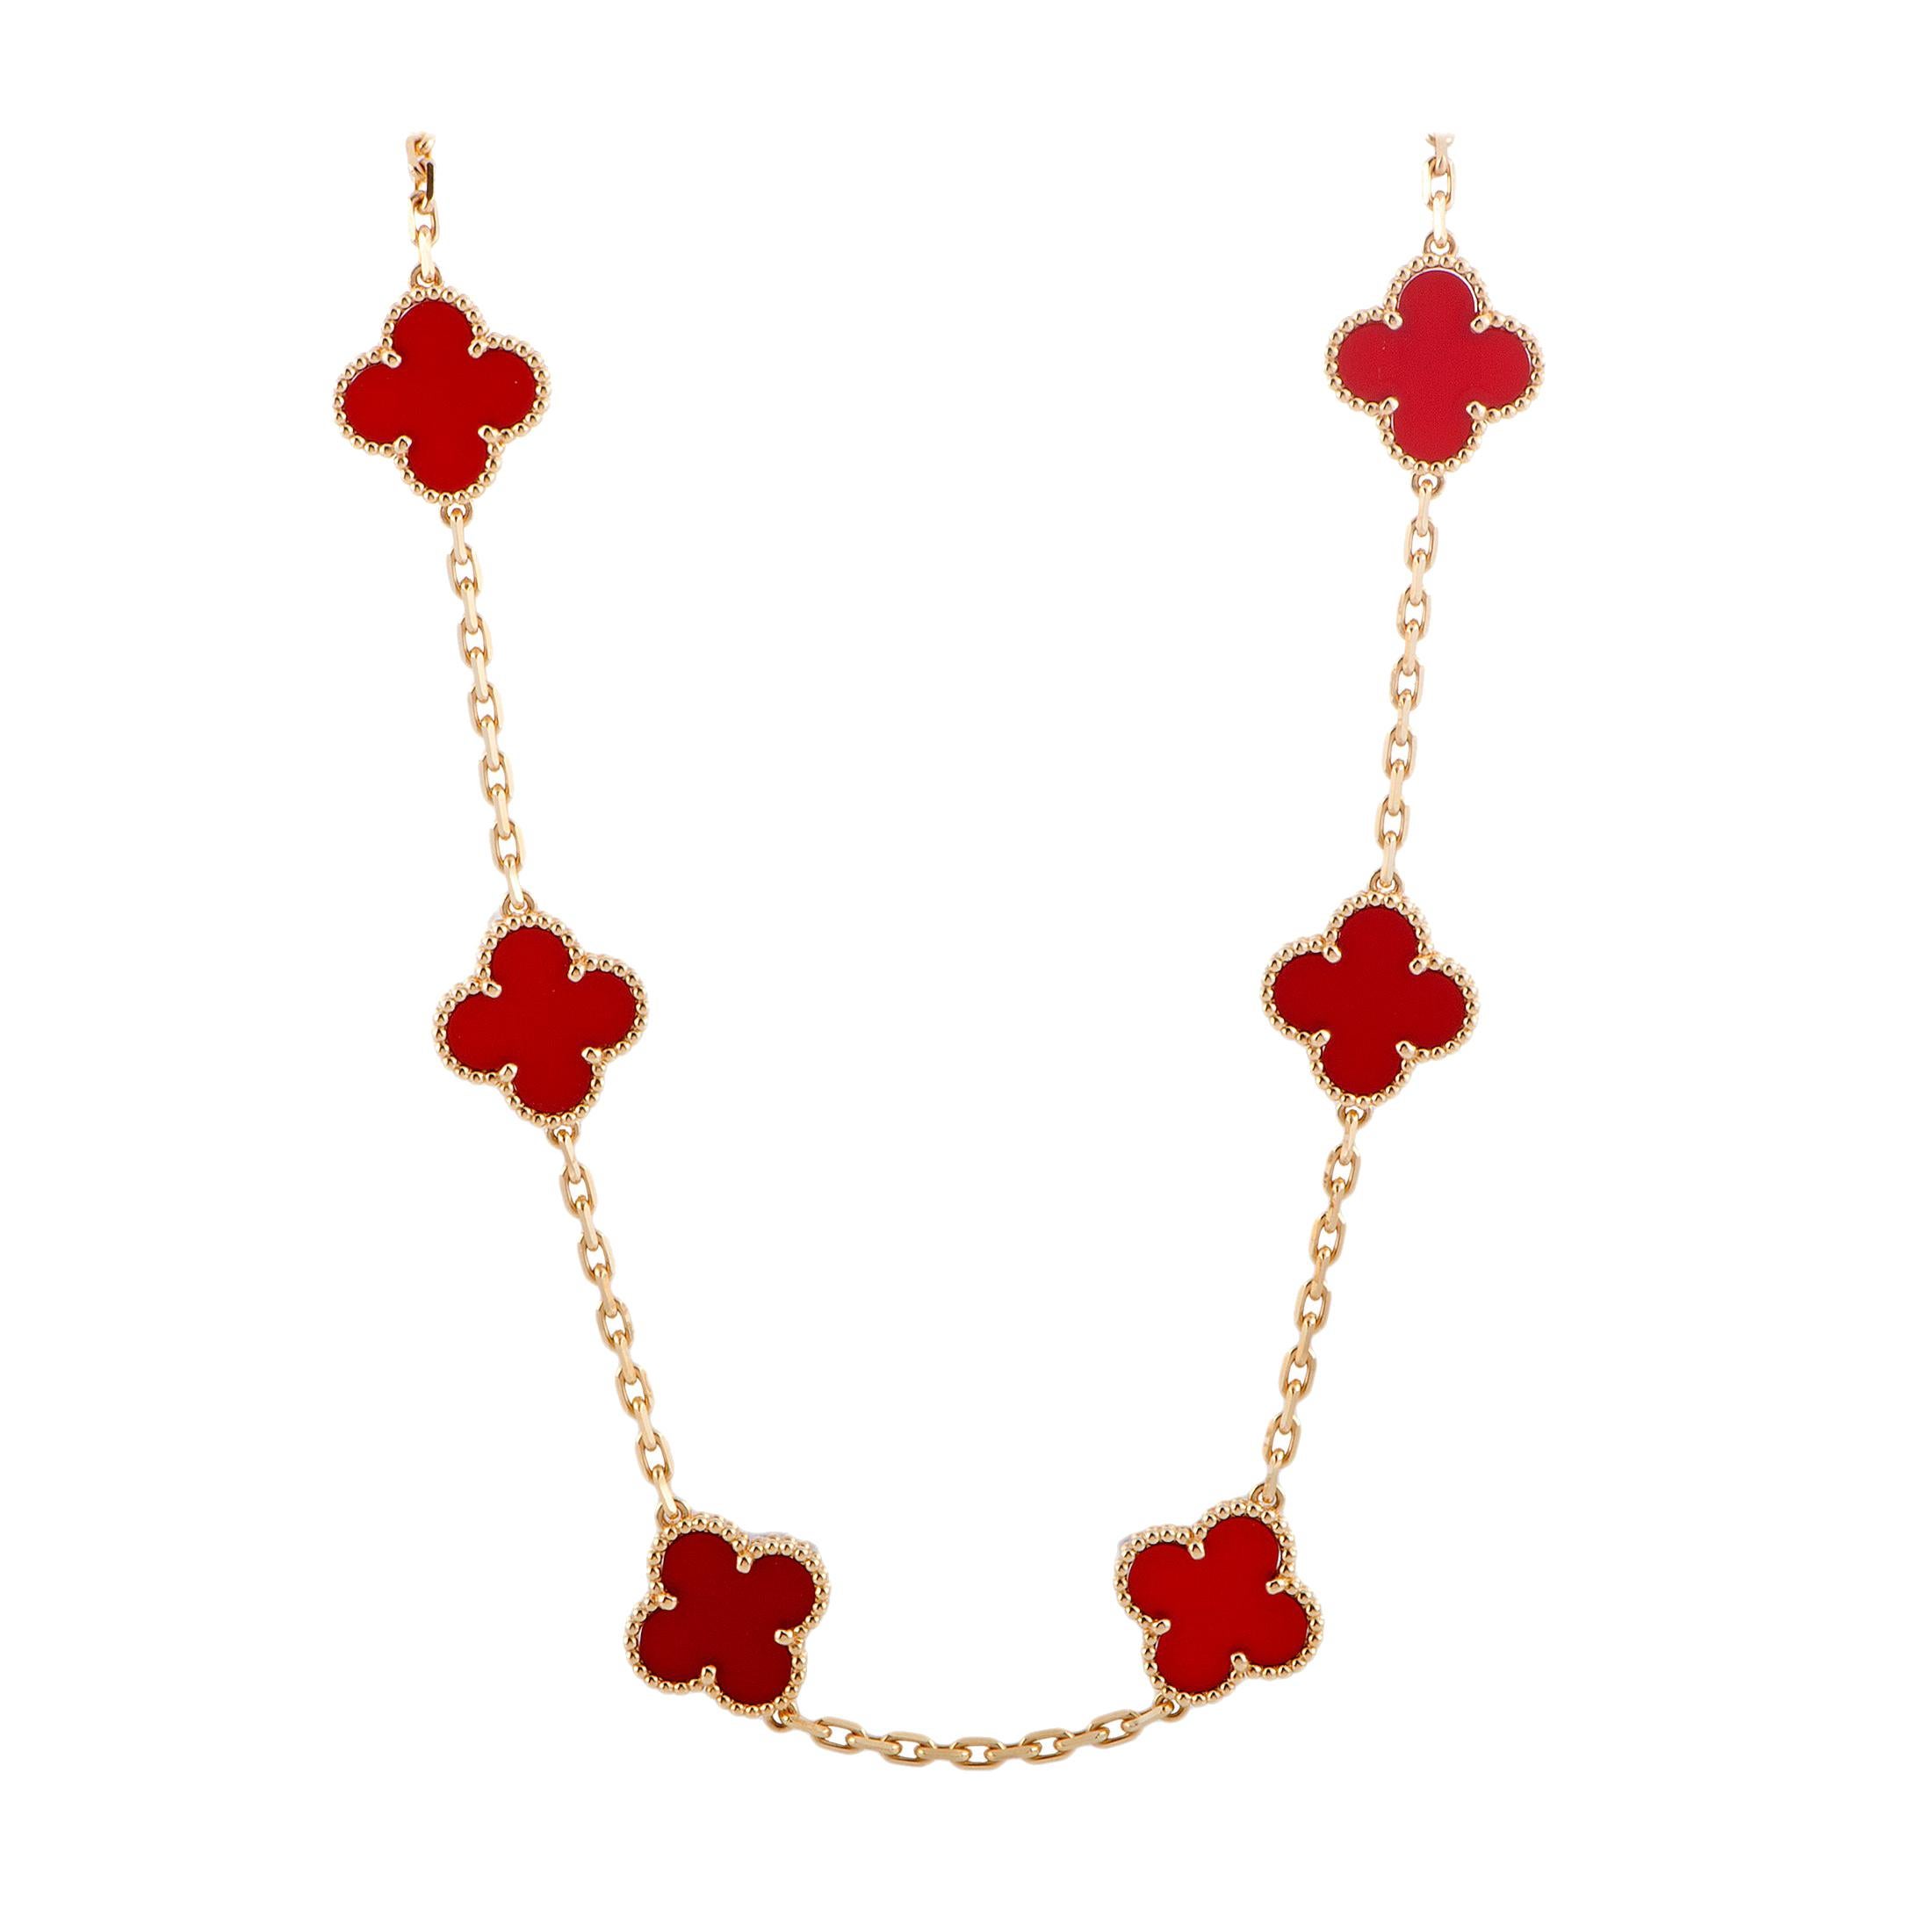 Van Cleef & Arpels Vintage Alhambra Yellow Gold and Carnelian 10 Motif Necklace